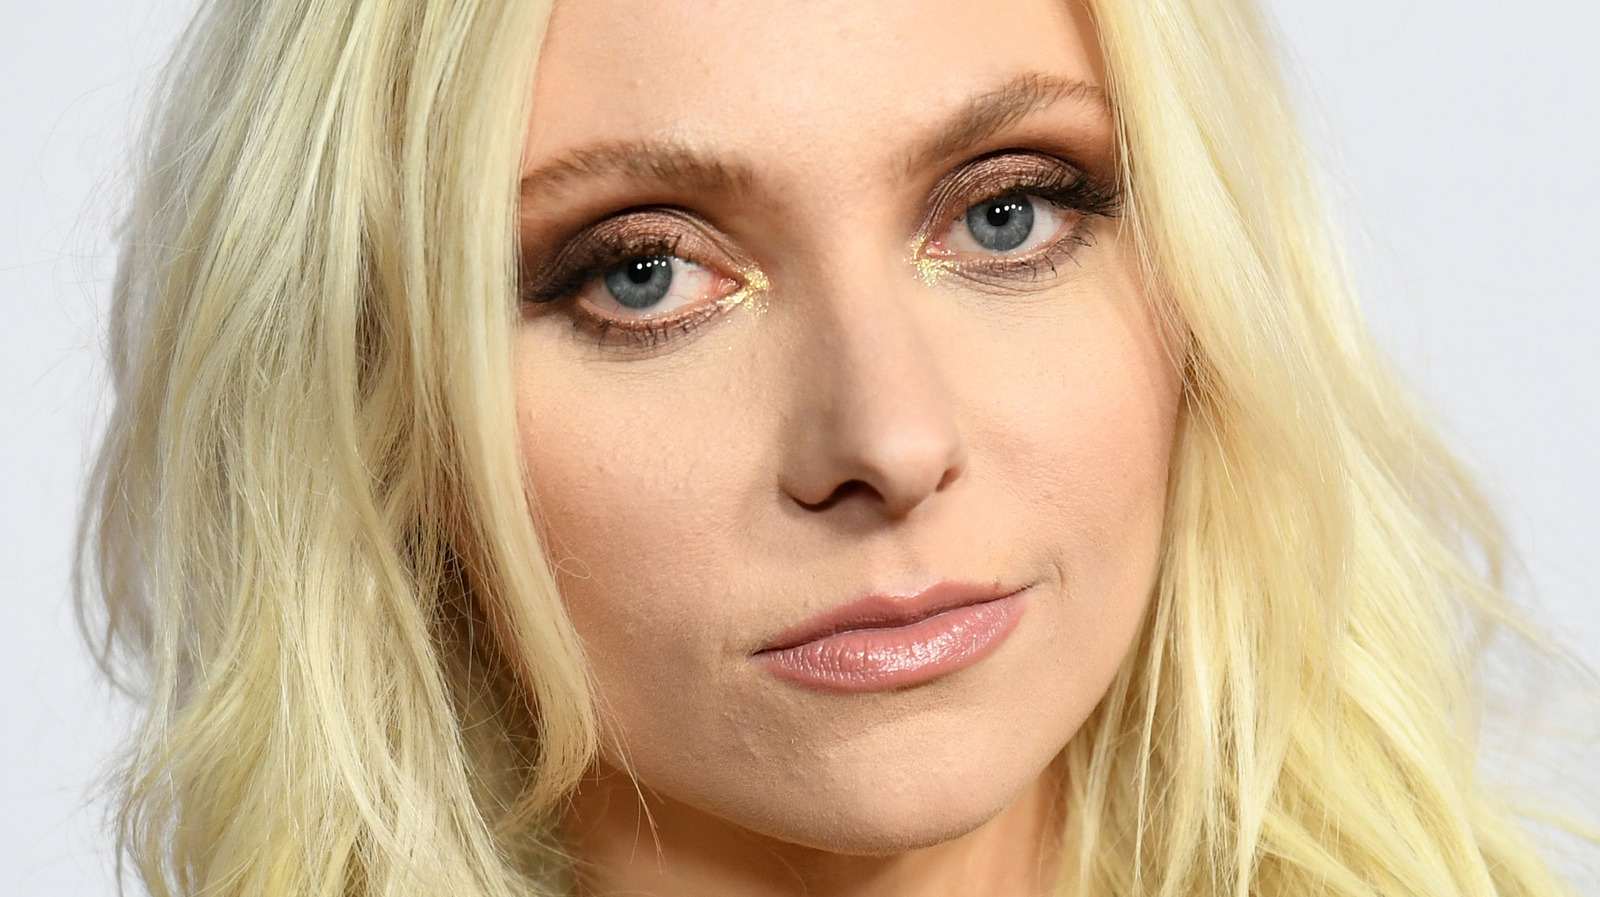 Taylor Momsen's Rare Red Carpet Appearance Is Turning Heads